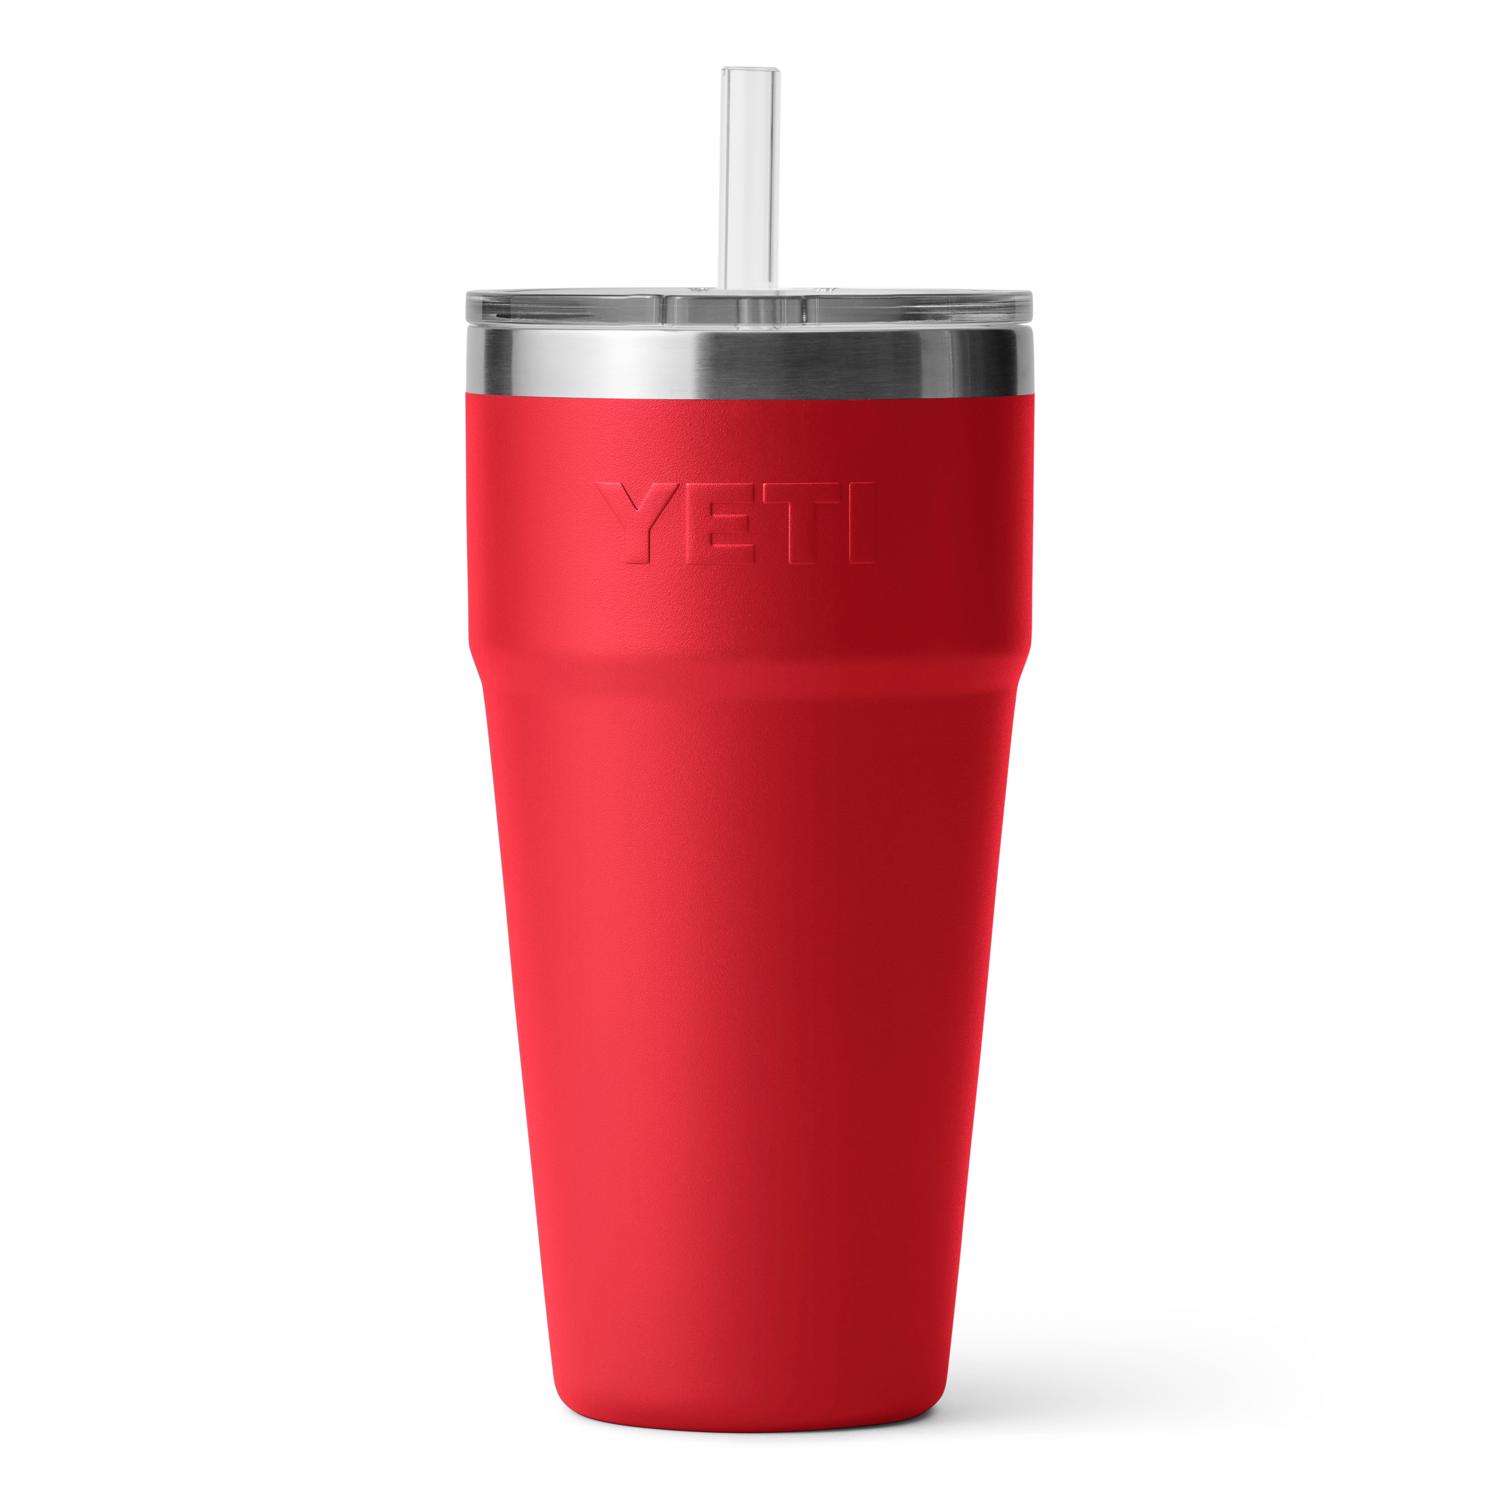 Custom 20 Oz Tumbler With Straw and Slide Top Lid Compare to Yeti Rambler  Cups 